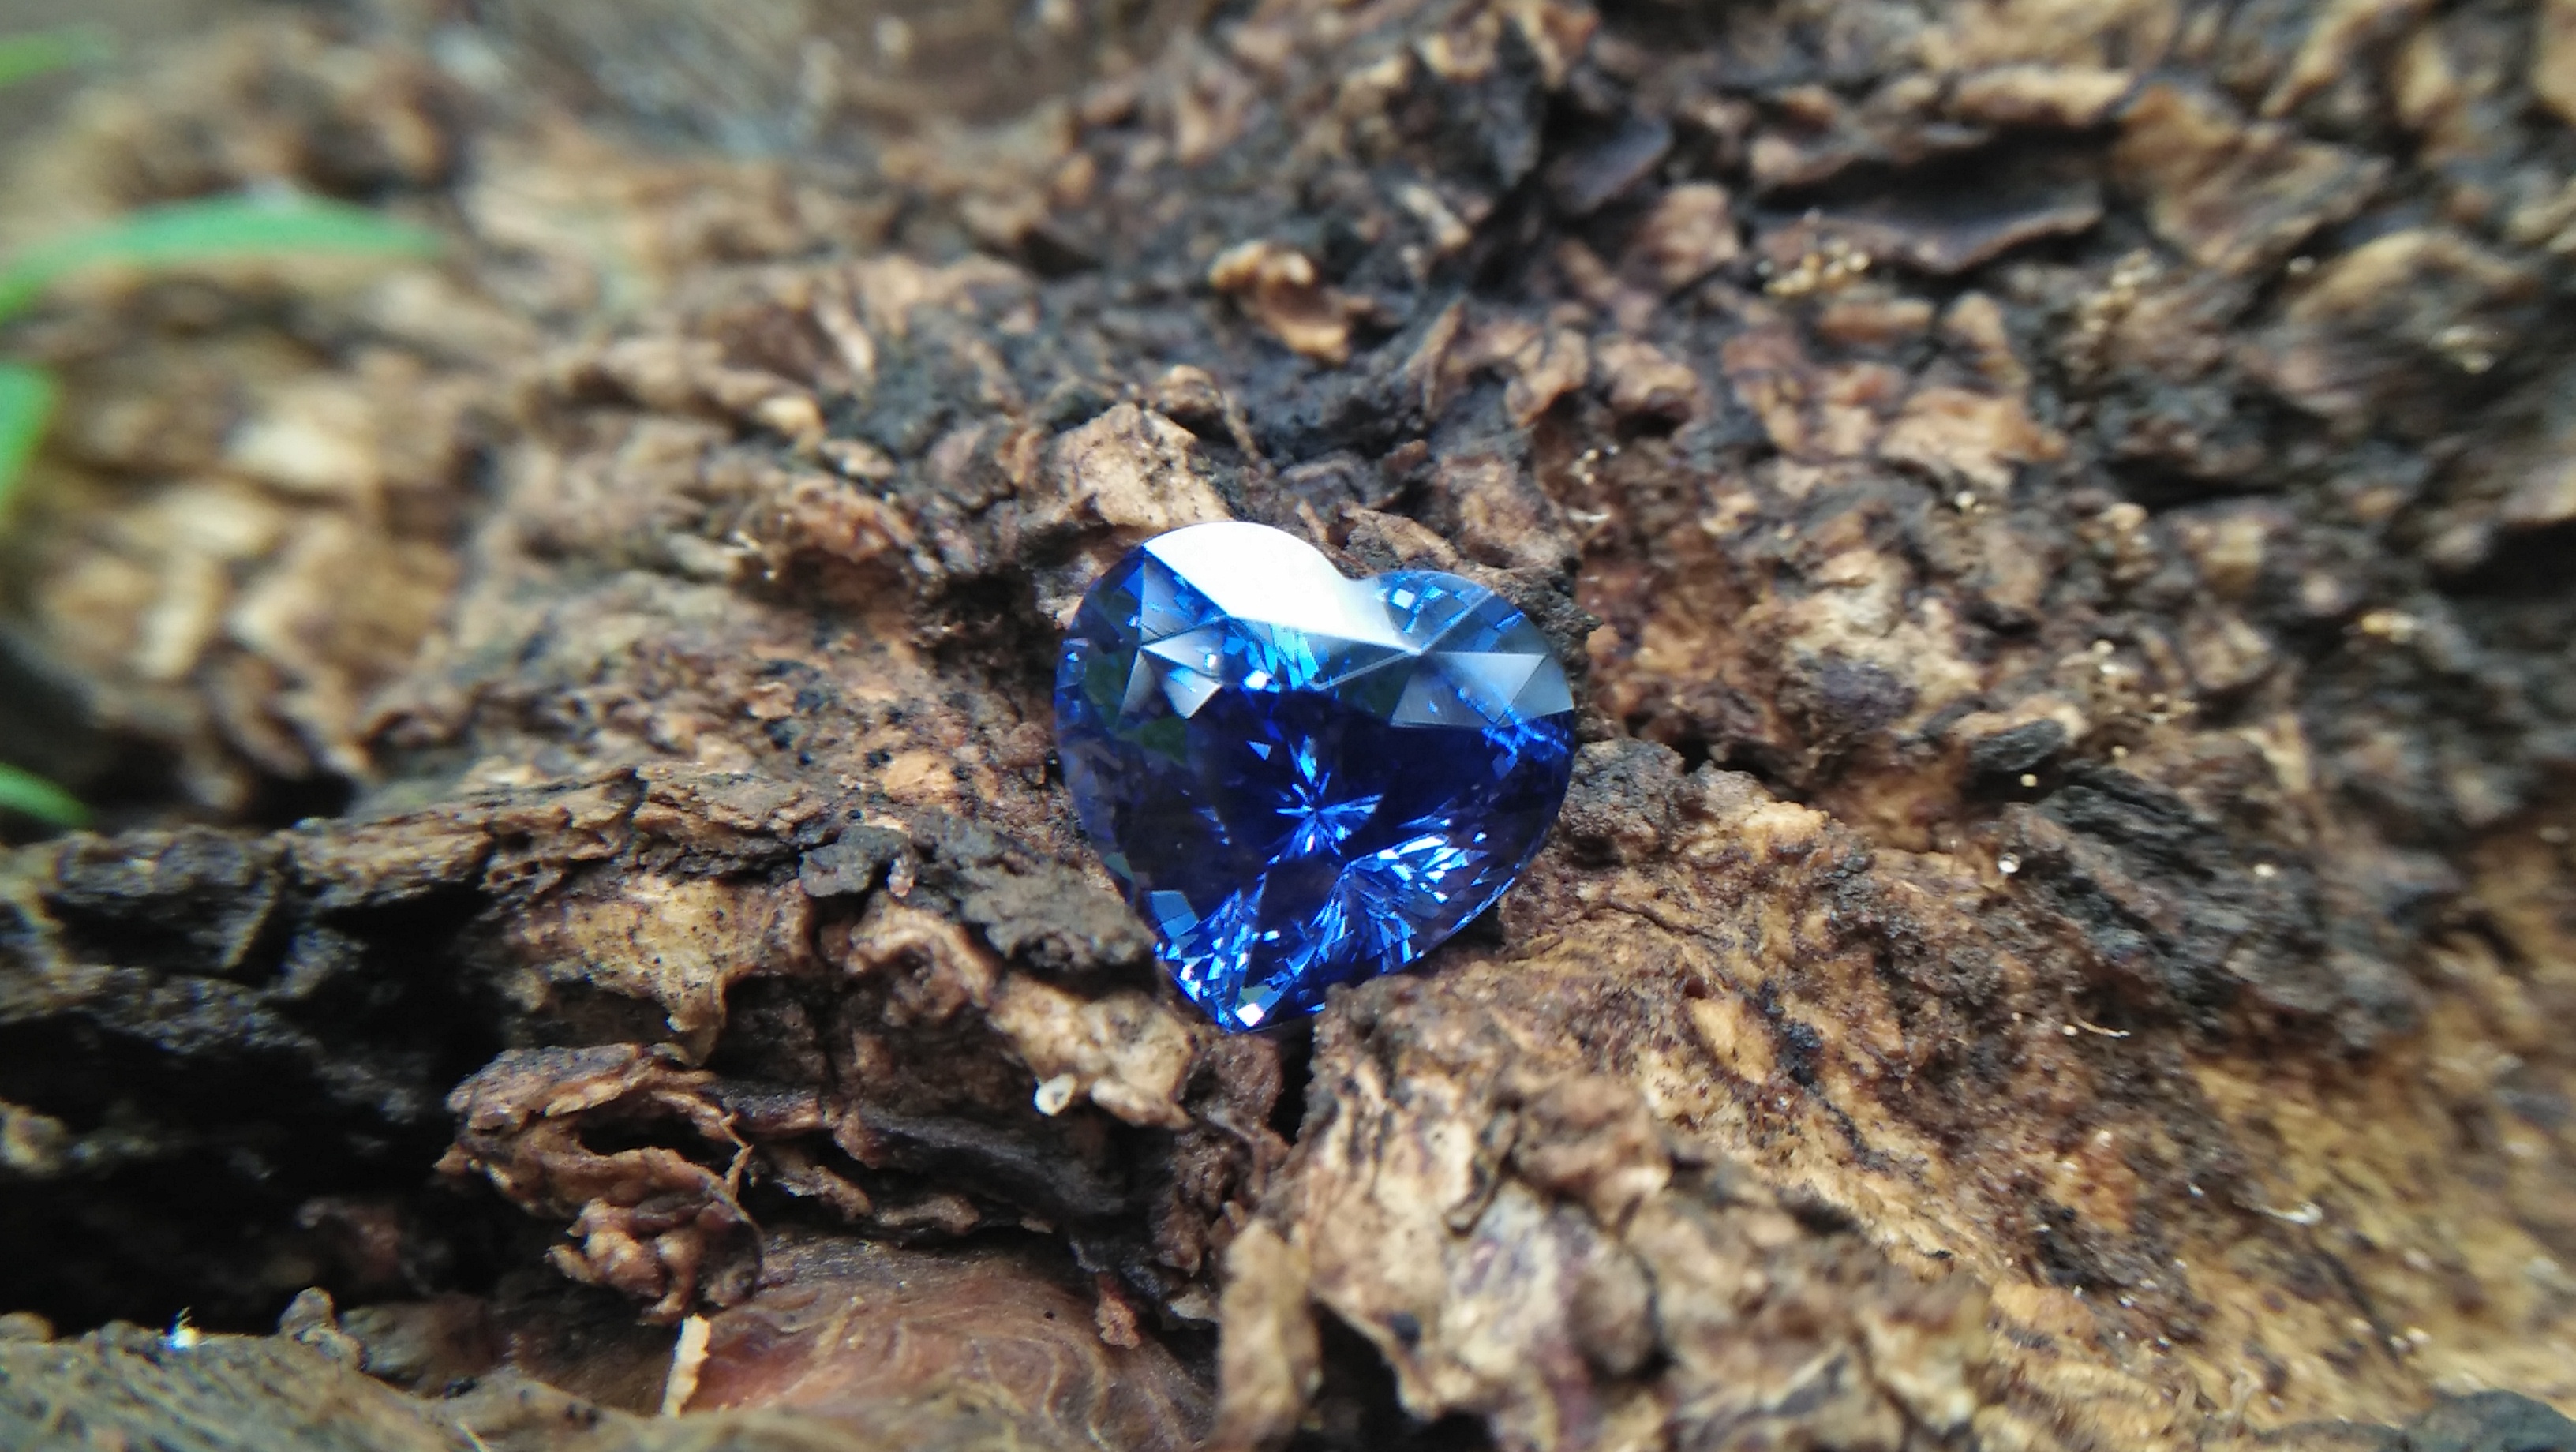 Sapphire is a precious gemstone, a variety of the mineral corundum, consisting of aluminium oxide Al2O3 with trace amounts of elements such as iron, titanium, chromium,copper, or magnesium. Category: Oxide mineral Formula: Aluminium oxide, Al2O3 Crystal system: Trigonal Crystal class: Hexagonal scalenohedral Mohs scale hardness: 9.0 Luster: Vitreous Specific gravity: 4.0 ~ 4.1 Sapphire is the birthstone for September Blue Sapphire is also very effective when it comes to channeling your healing powers from a higher source, which makes it a popular crystal for Reiki healers. It also has the ability to heal through the power of voice. When it comes to physical healing, Blue Sapphire can help in the overall healing of the body